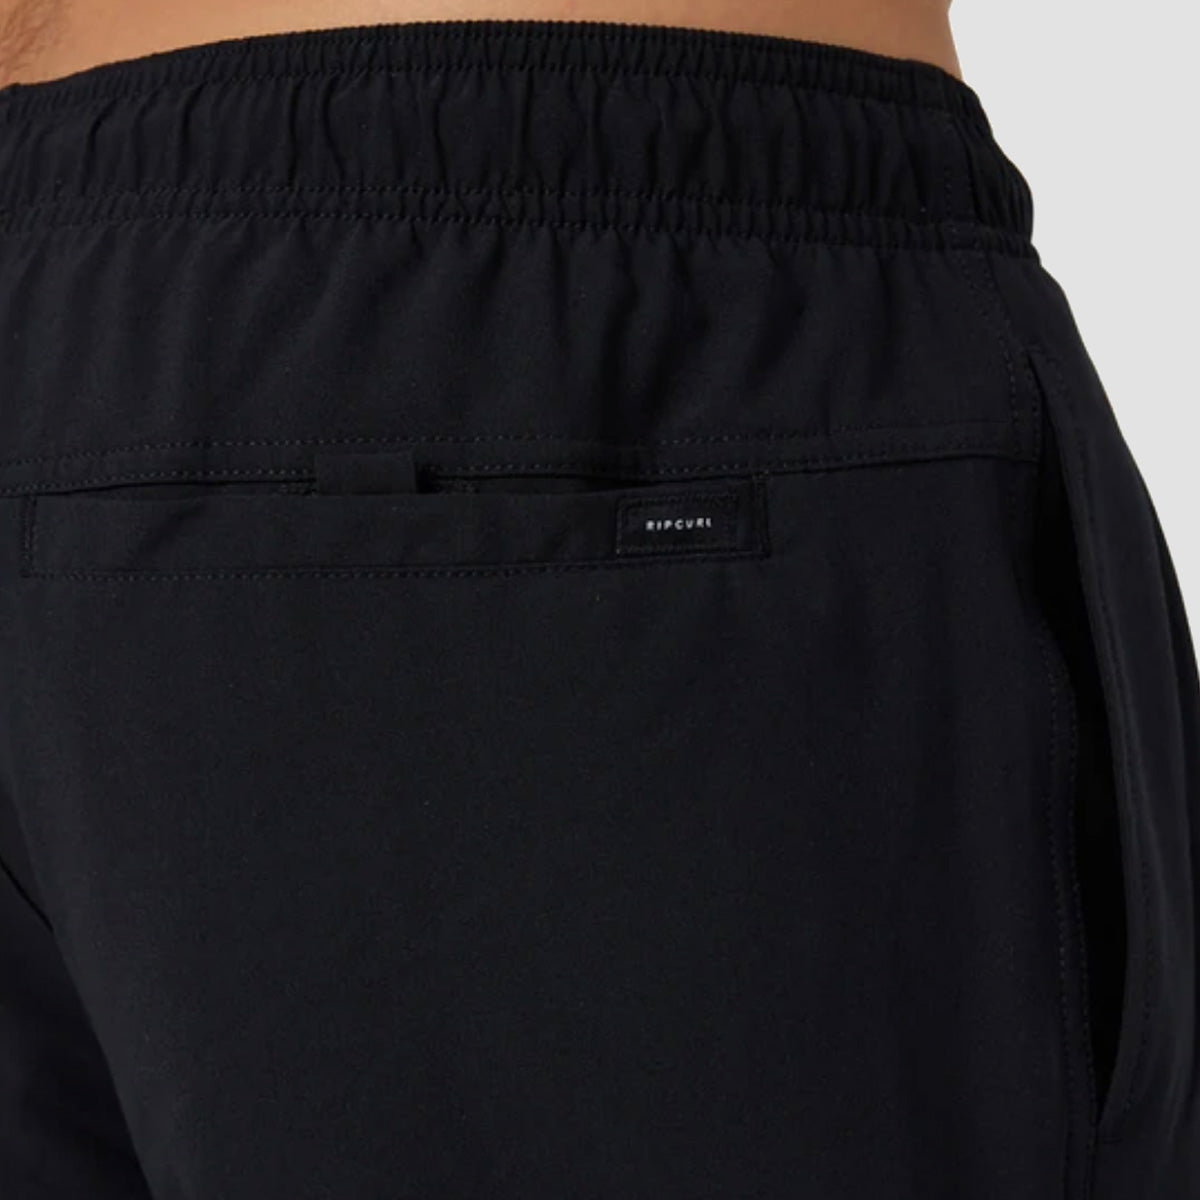 Rip Curl Daily Volley 16" Boardshorts Black